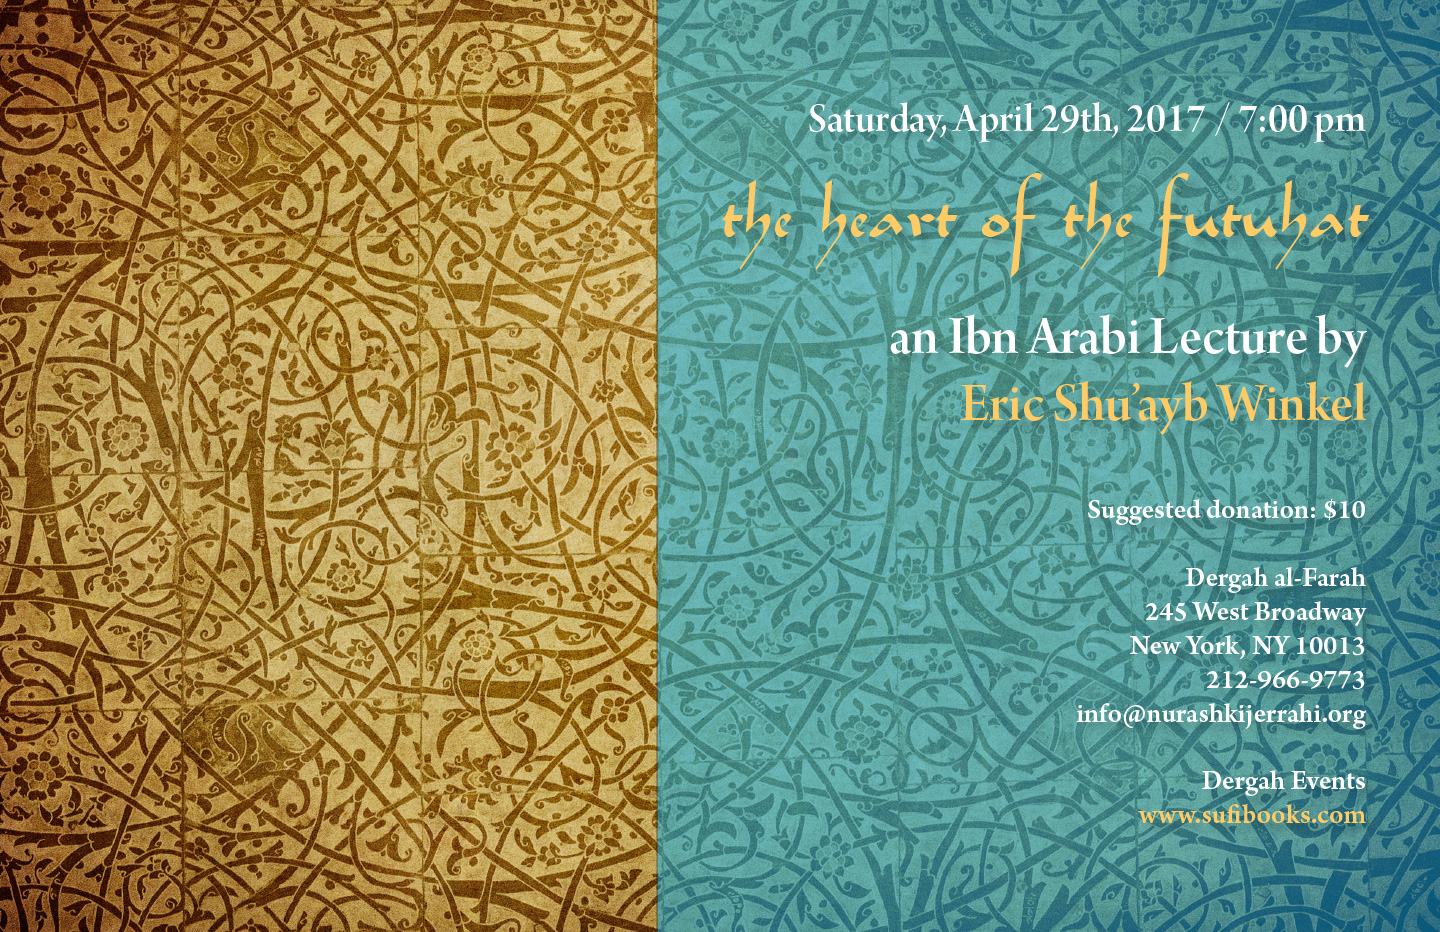 Saturday, April 29, 2017 | THE HEART OF THE FUTUHAT: an Ibn Arabi Lecture by Eric Shu’ayb Winkel | 7:00 PM | Suggested donation: $10